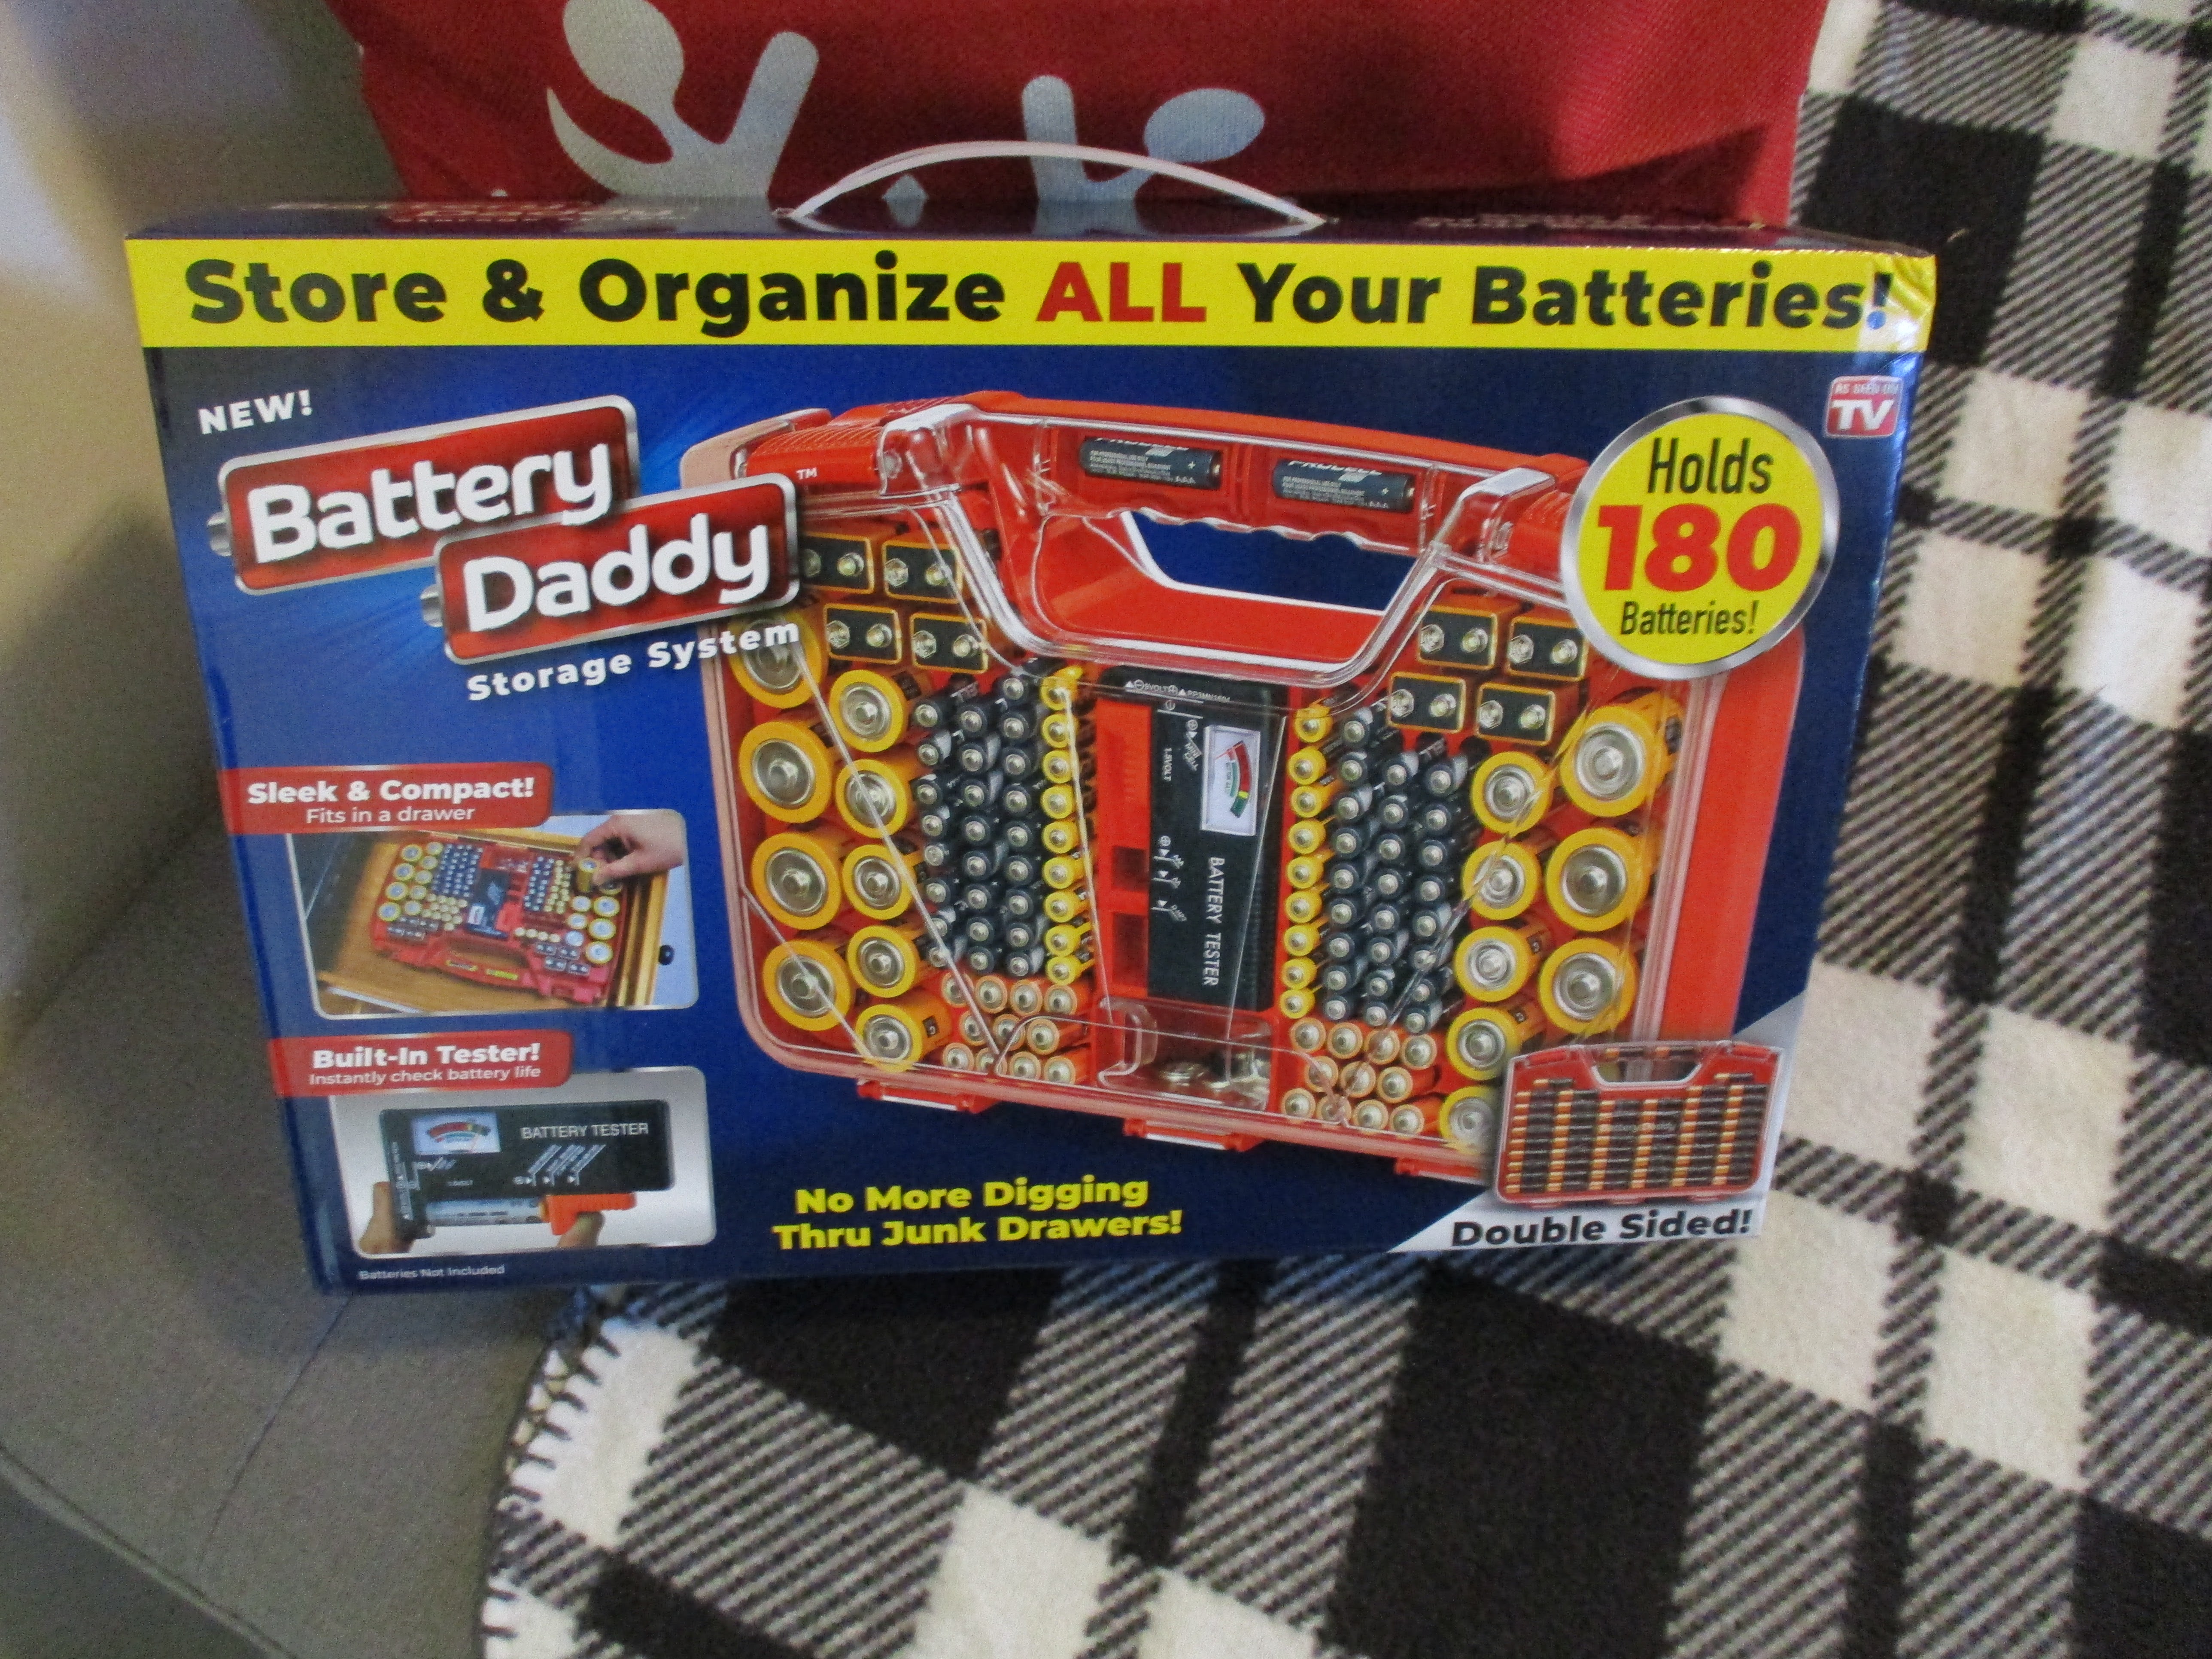 Missy's Product Reviews : Battery Daddy Holiday Gift Guide 2022